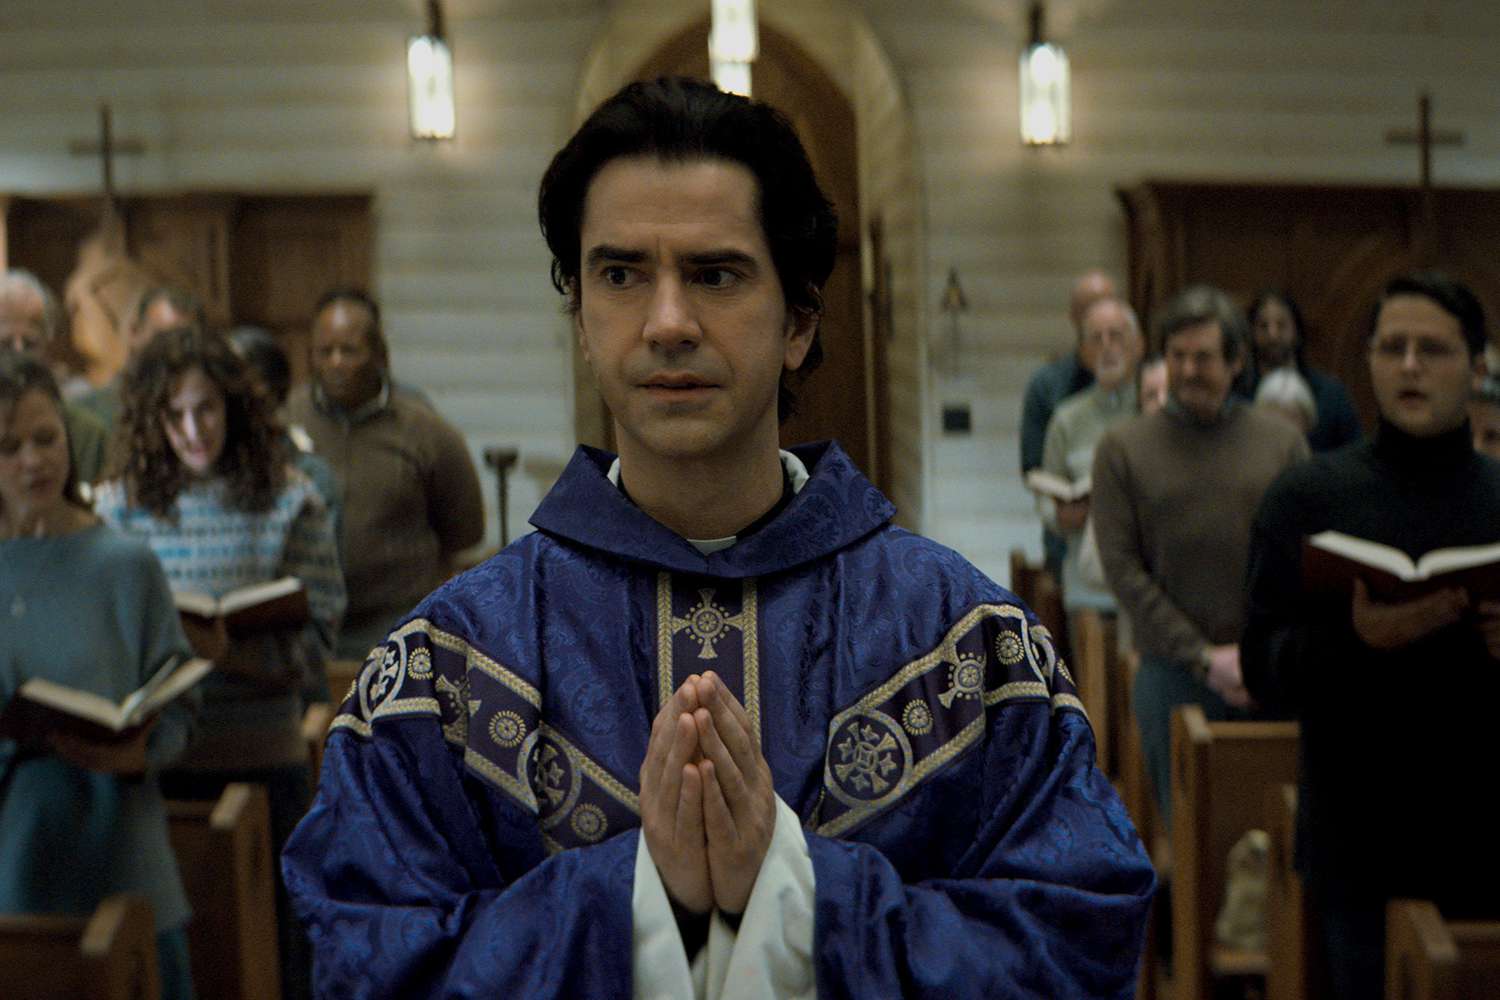 MIDNIGHT MASS (L to R) HAMISH LINKLATER as FATHER PAUL in episode 103 of MIDNIGHT MASS